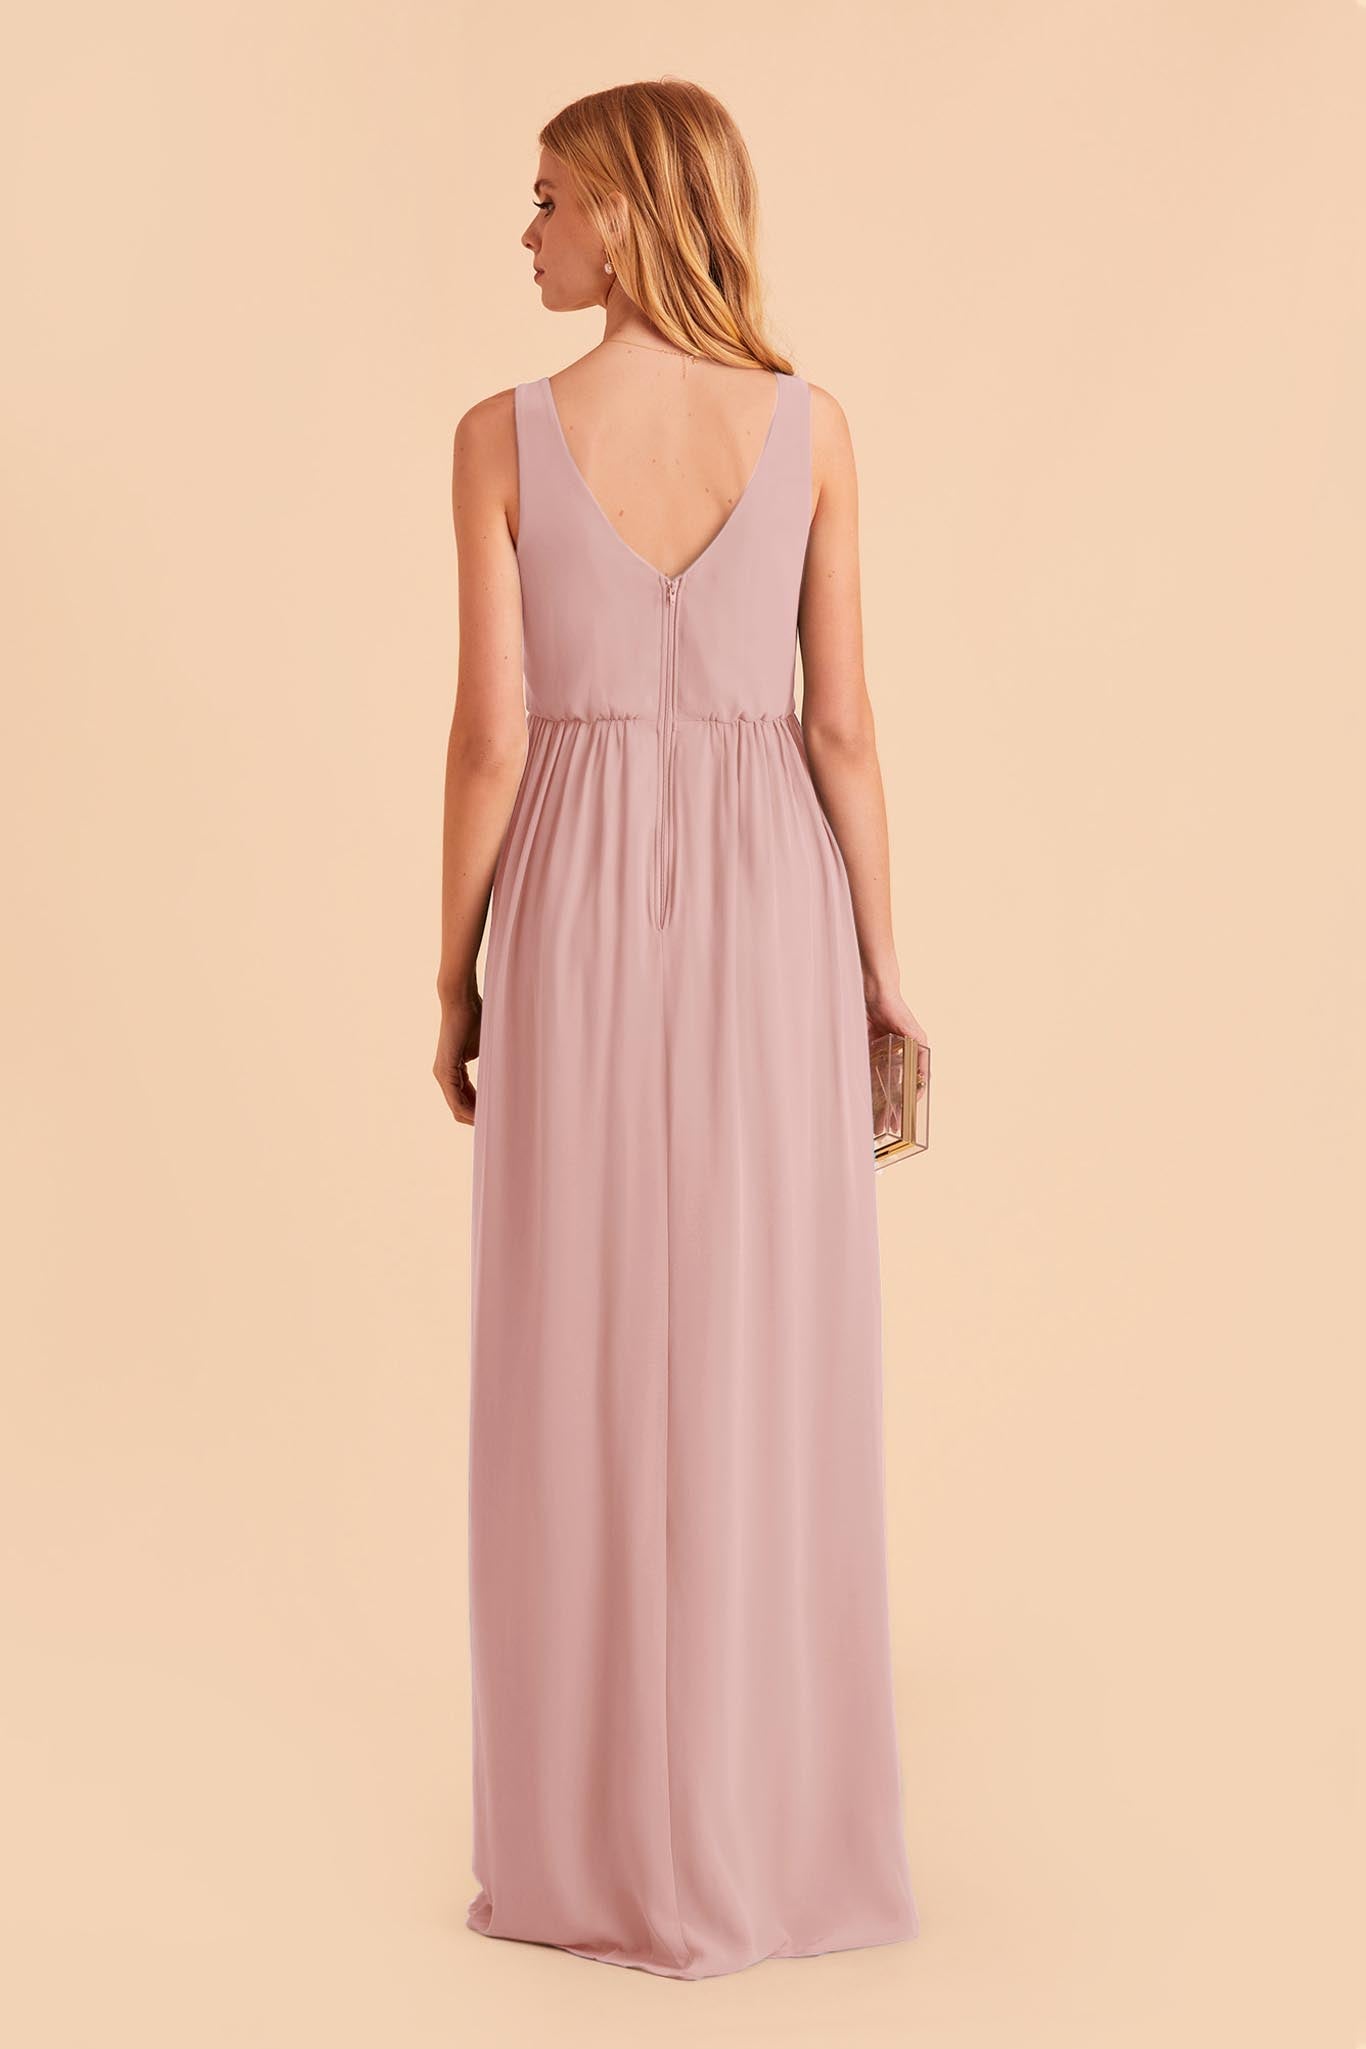 English Rose Laurie Empire Dress by Birdy Grey